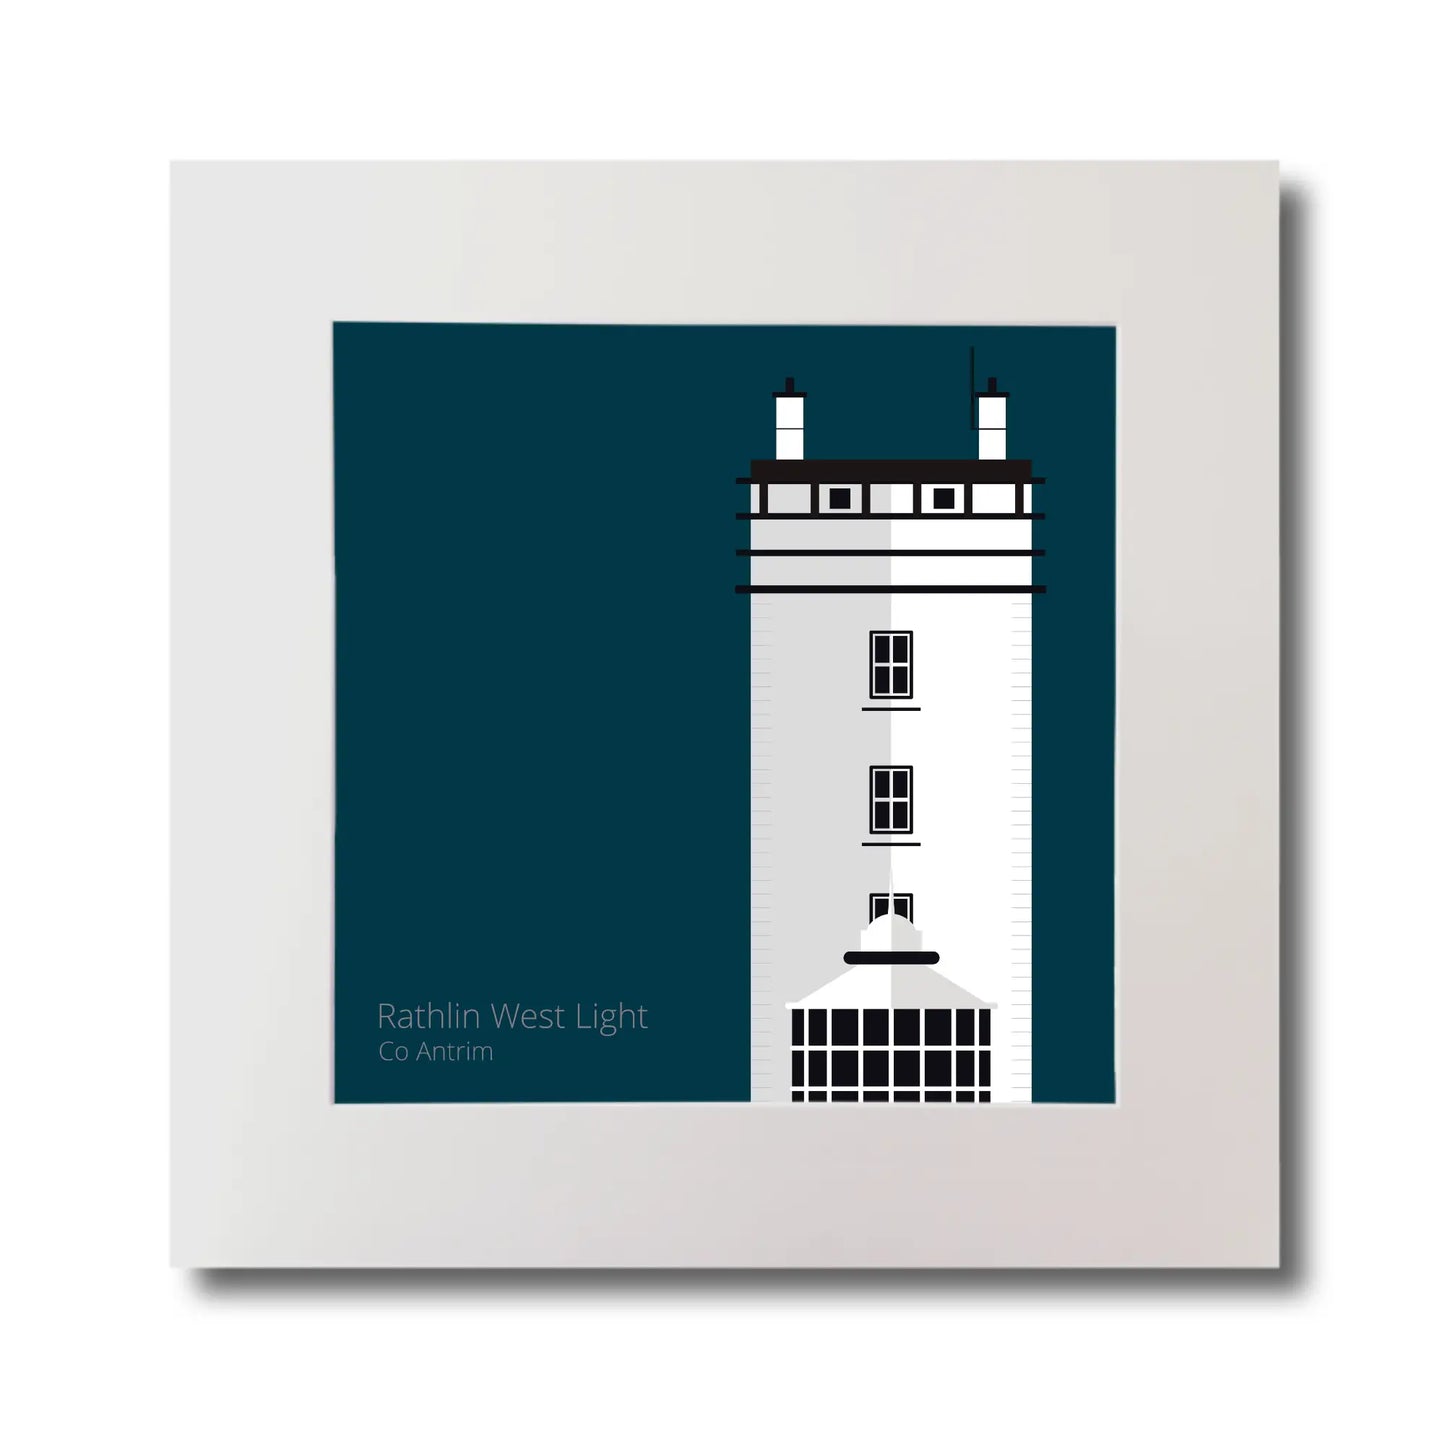 Illustration of Rathlin West lighthouse on a midnight blue background, mounted and measuring 30x30cm.